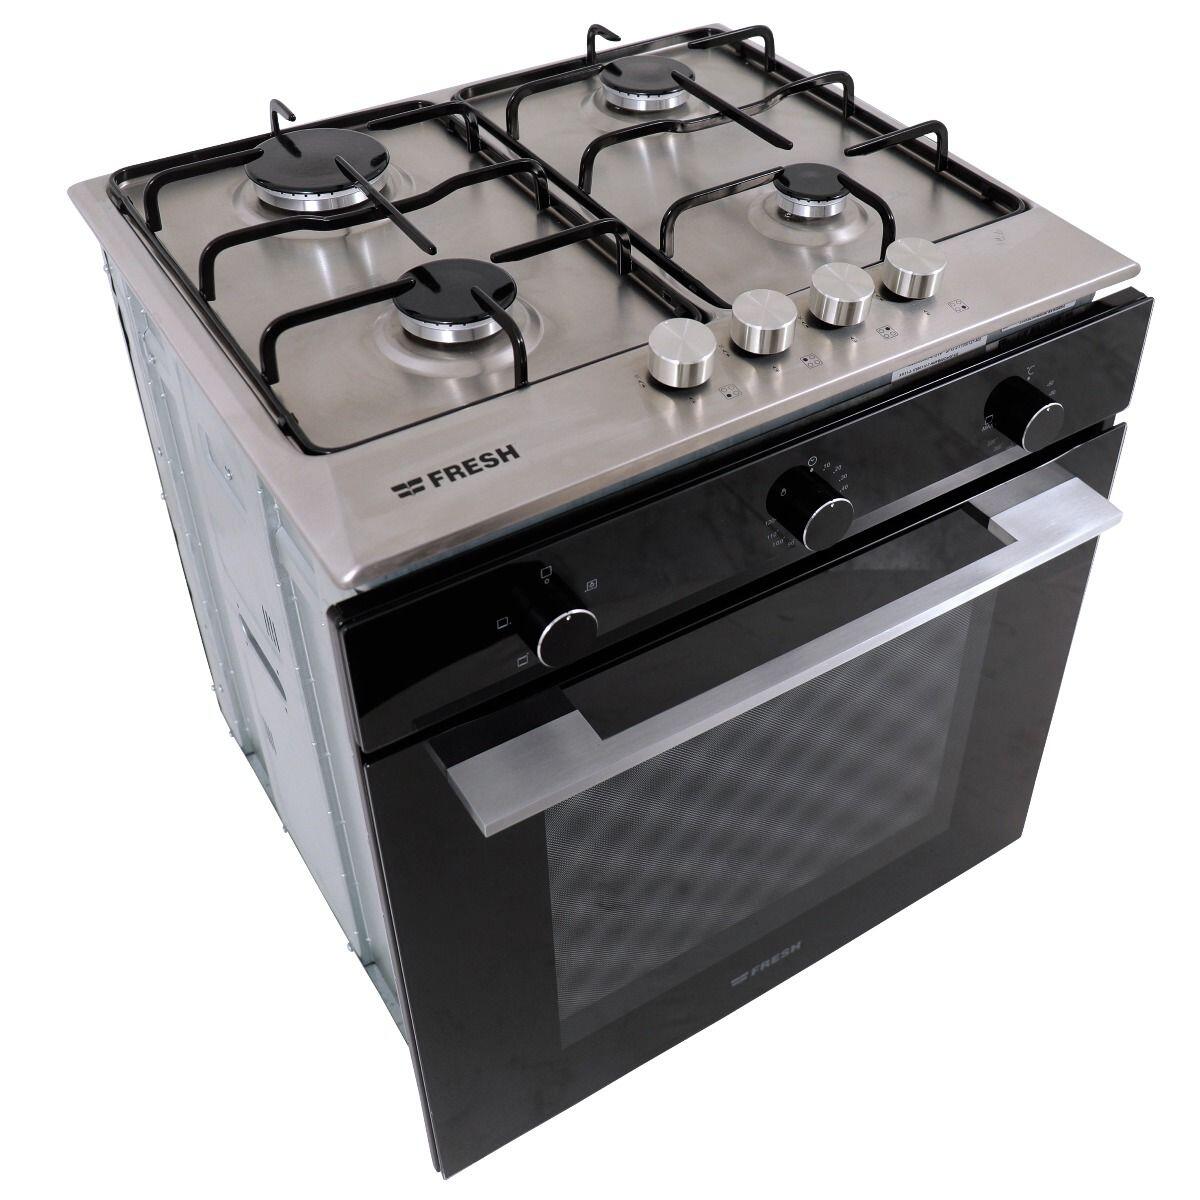 Fresh Set Of Built-In Gas Hob, 4 Burners and Electric Oven With Grill - Built-in Hobs - Built-in